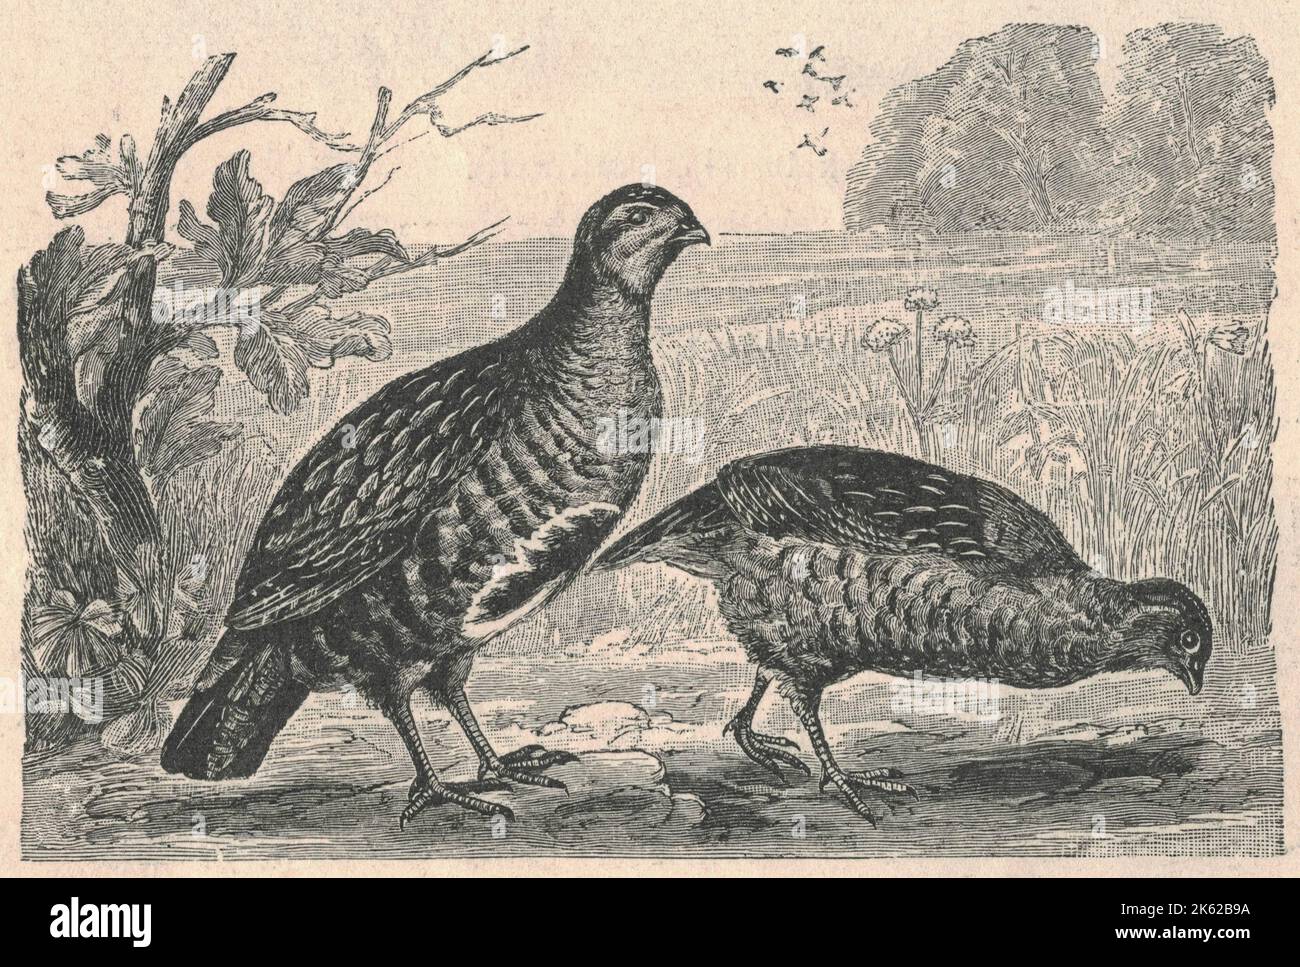 Antique engraved illustration of the partridge. Vintage illustration of the partridge. Old engraved picture of the bird. A partridge is a medium-sized galliform bird in any of several genera, with a wide native distribution throughout parts of Europe, Asia and Africa. Several species have been introduced to the Americas. They are sometimes grouped in the Perdicinae subfamily of the Phasianidae (pheasants, quail, etc.). However, molecular research suggests that partridges are not a distinct taxon within the family Phasianidae, but that some species are closer to the pheasants, while others are Stock Photo